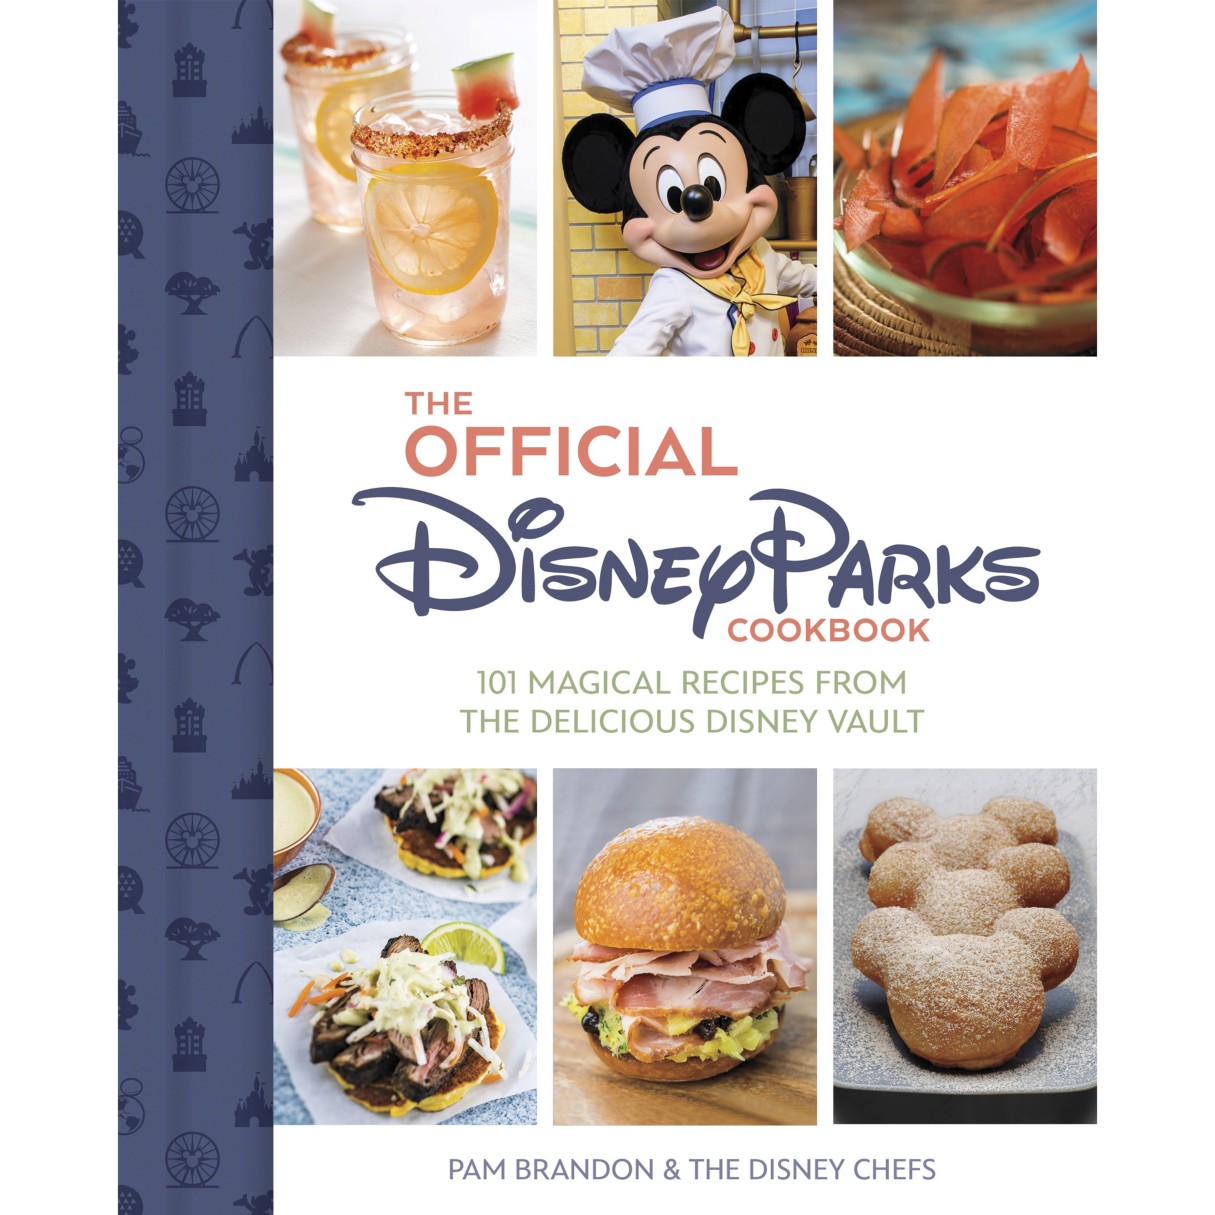 The Official Disney Parks Cookbook: 101 Magical Recipes from the Delicious Disney Vault